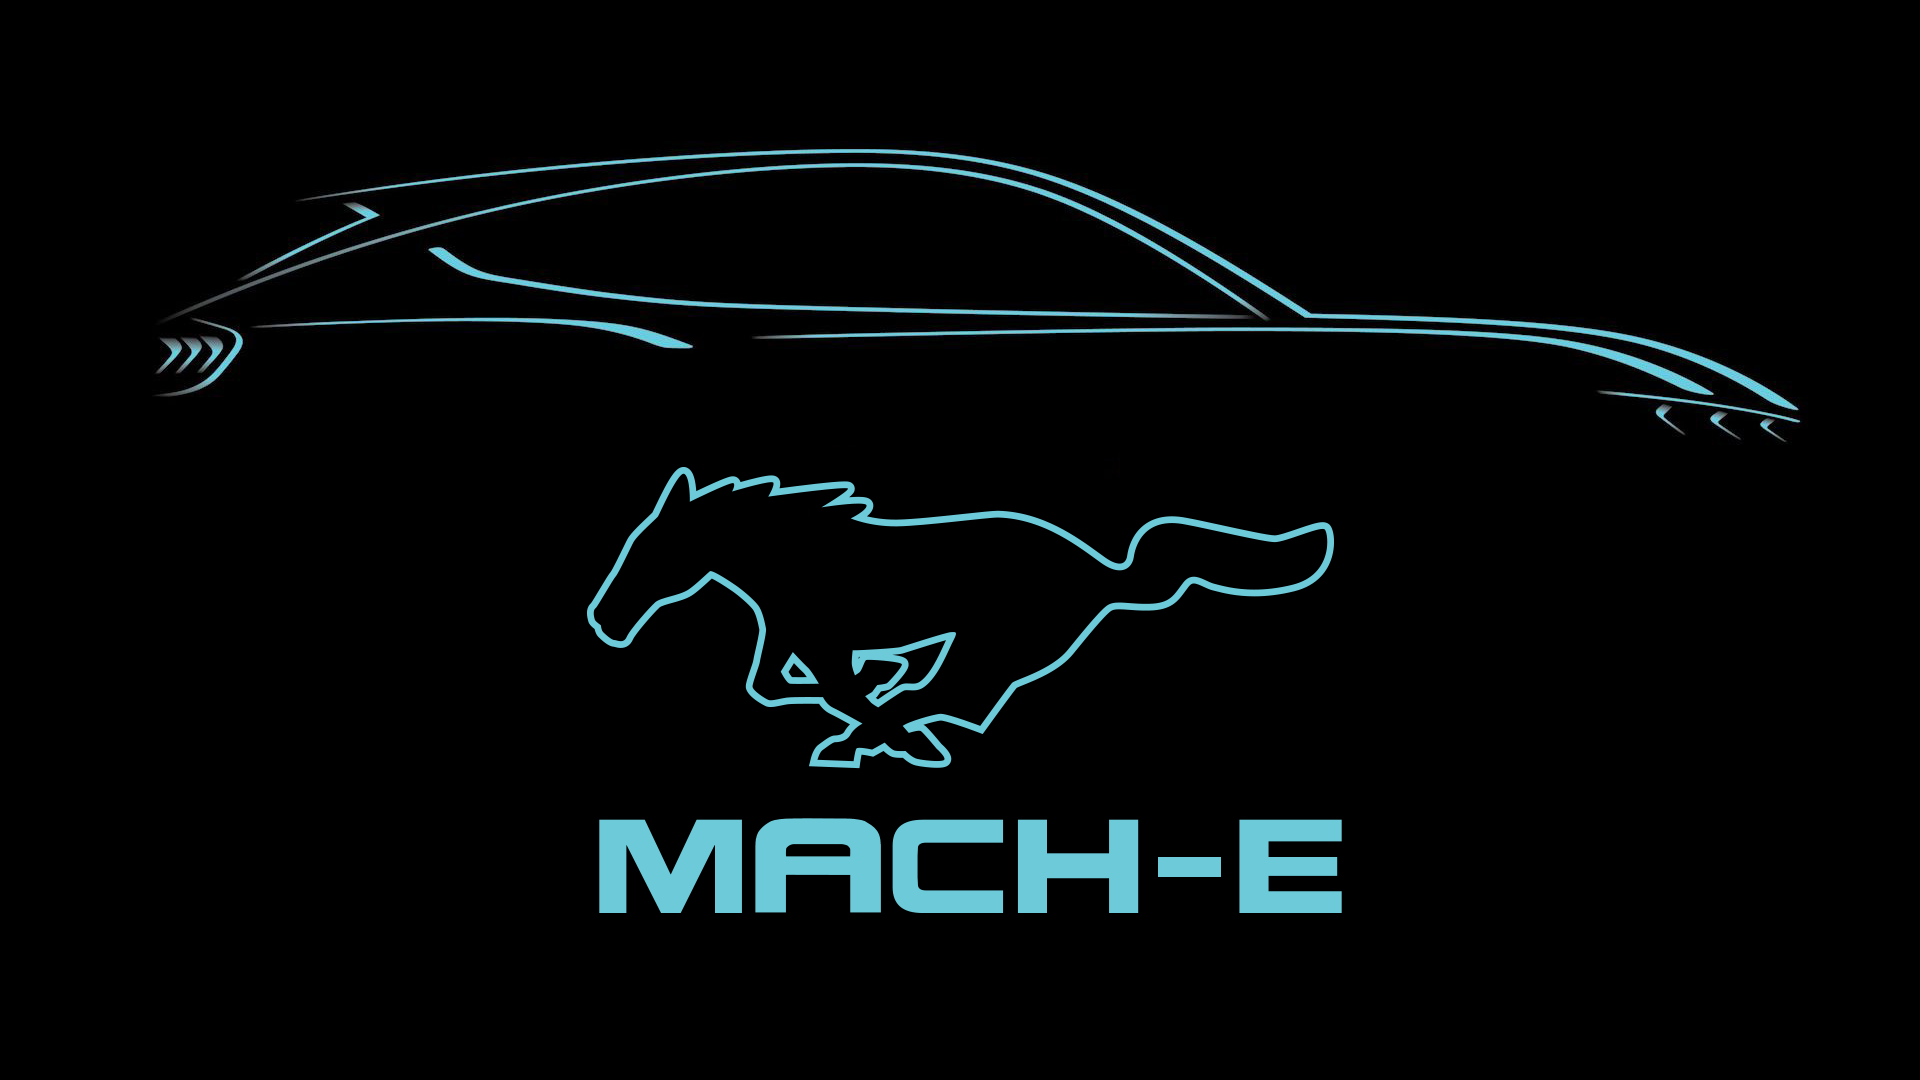 The Mustang-inspired electric SUV: Mustang Mach-E. Image via Connor Hoffman.